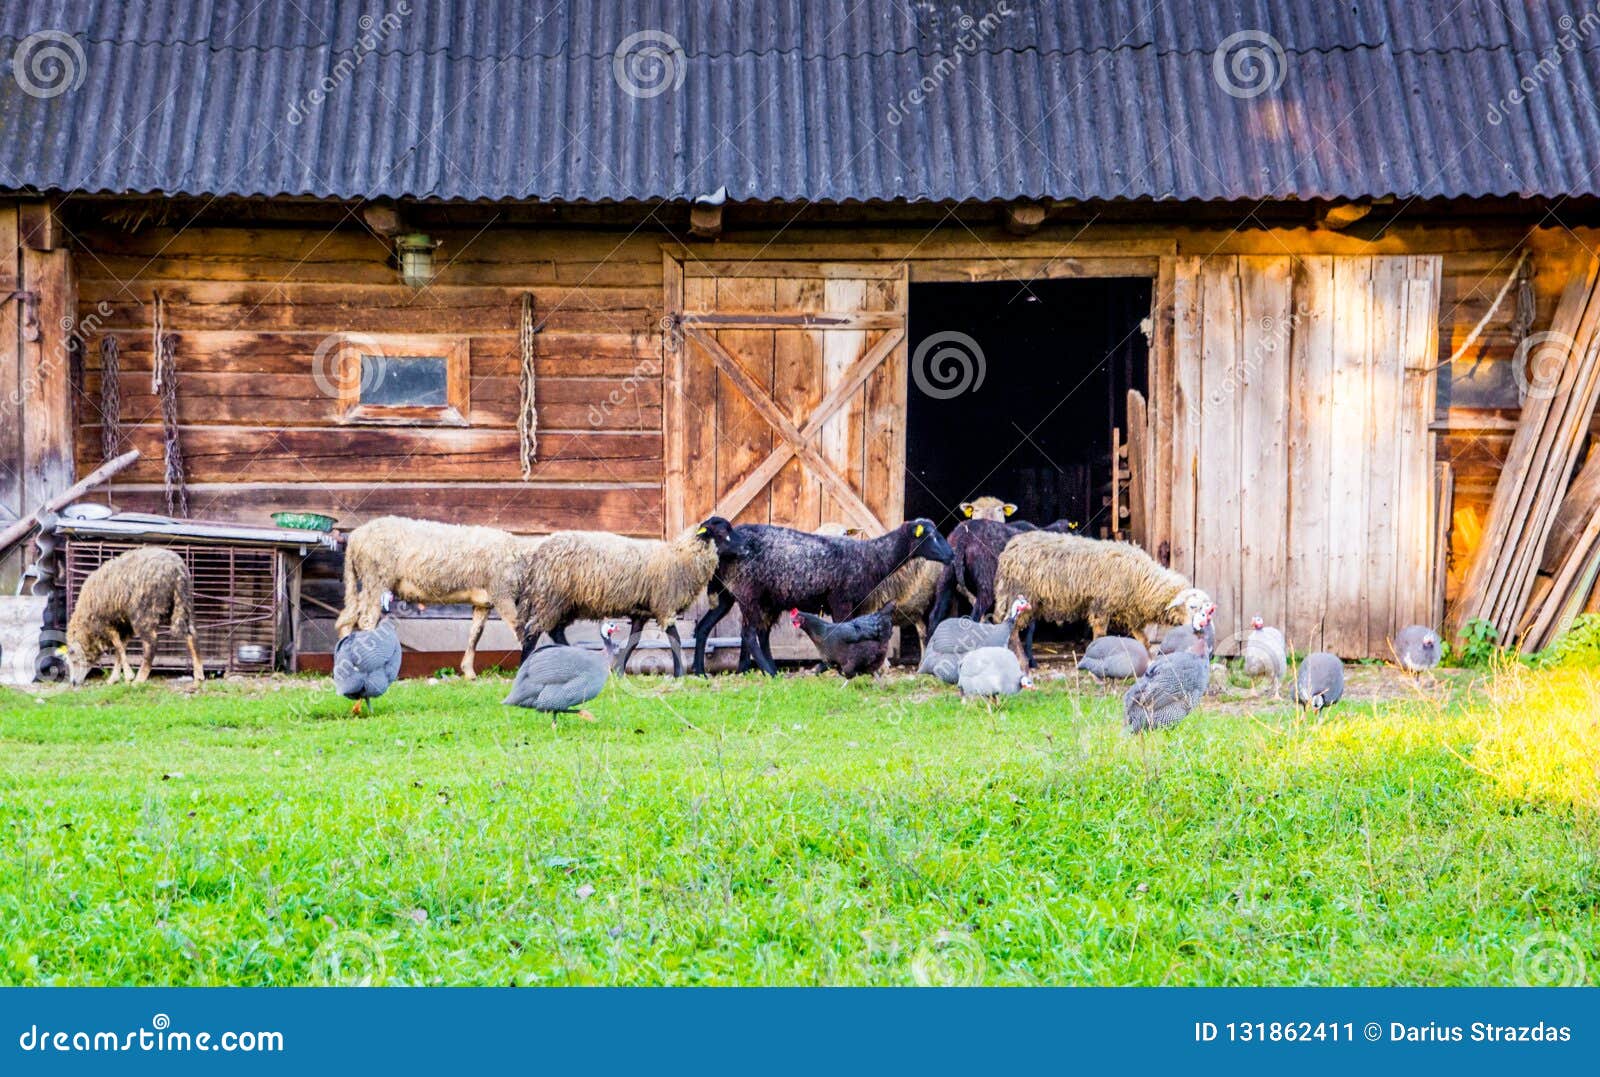 Farm Animals Near Wooden House Stock Image - Image of looking, sheep